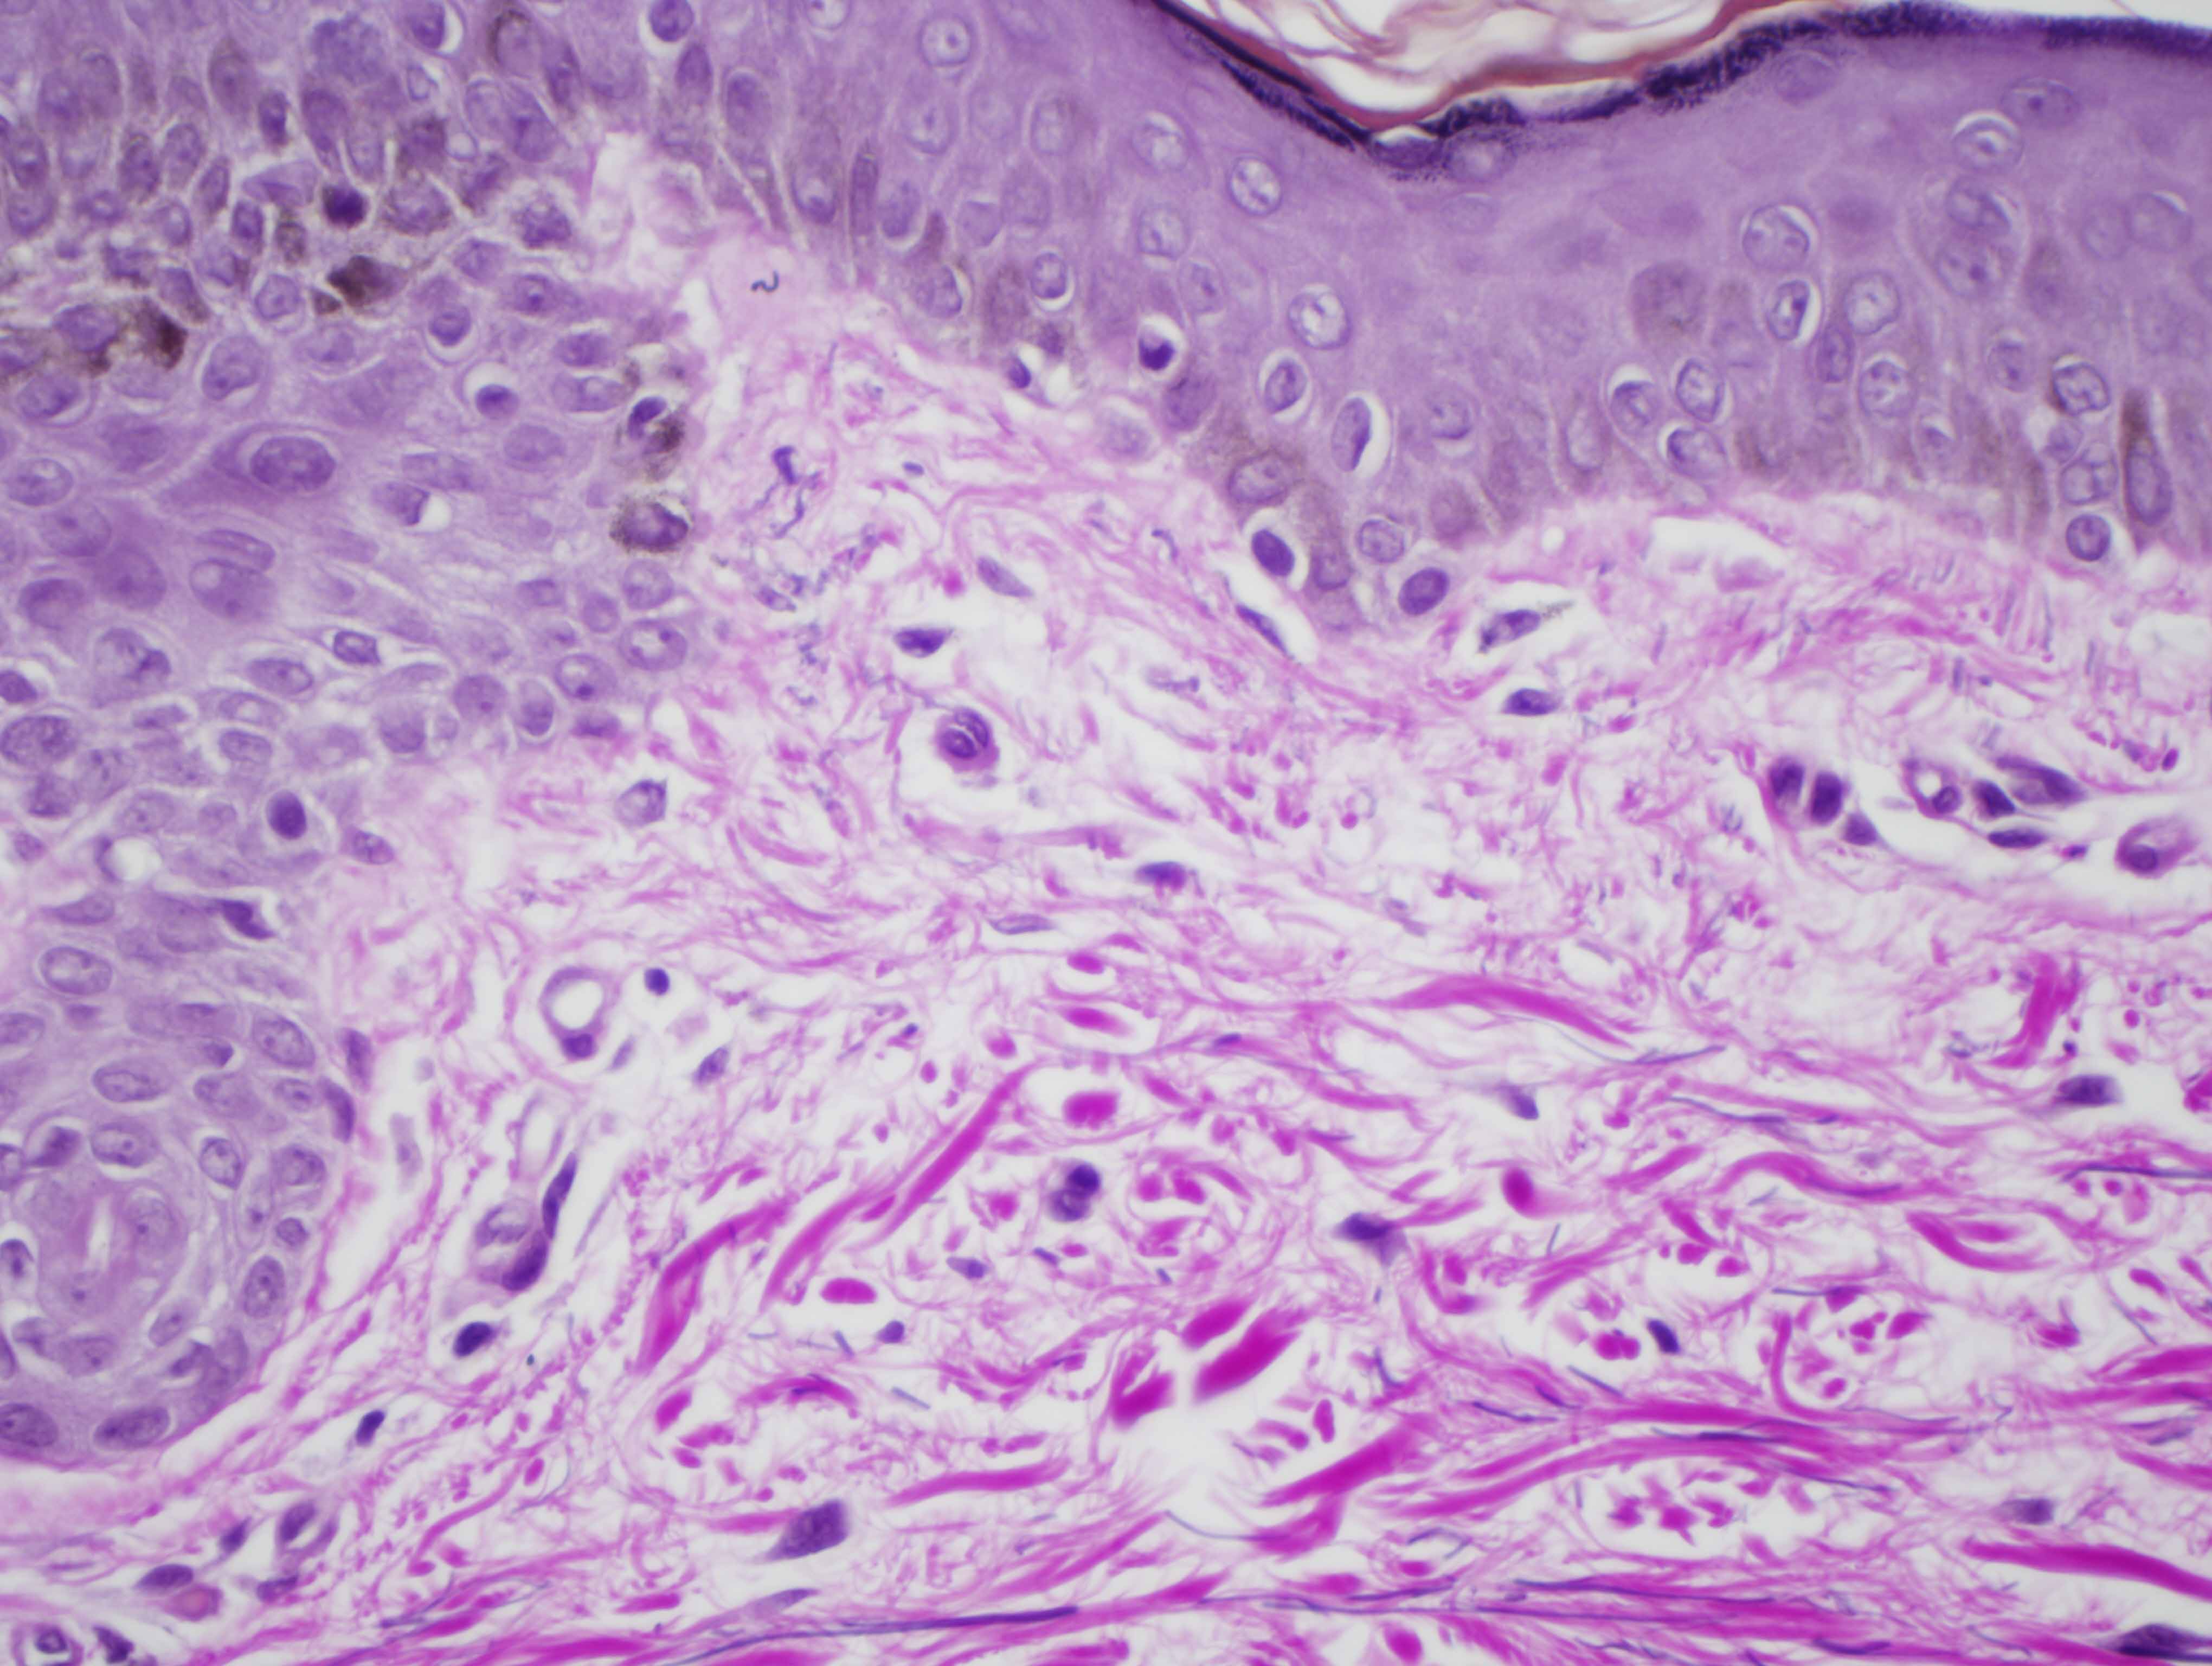 Slide 5: The Elastic tissue stain shows a very striking pattern of papillary dermal elastolysis. There is only a minimal residual oxytalan and elaunin elastic fiber plexus.